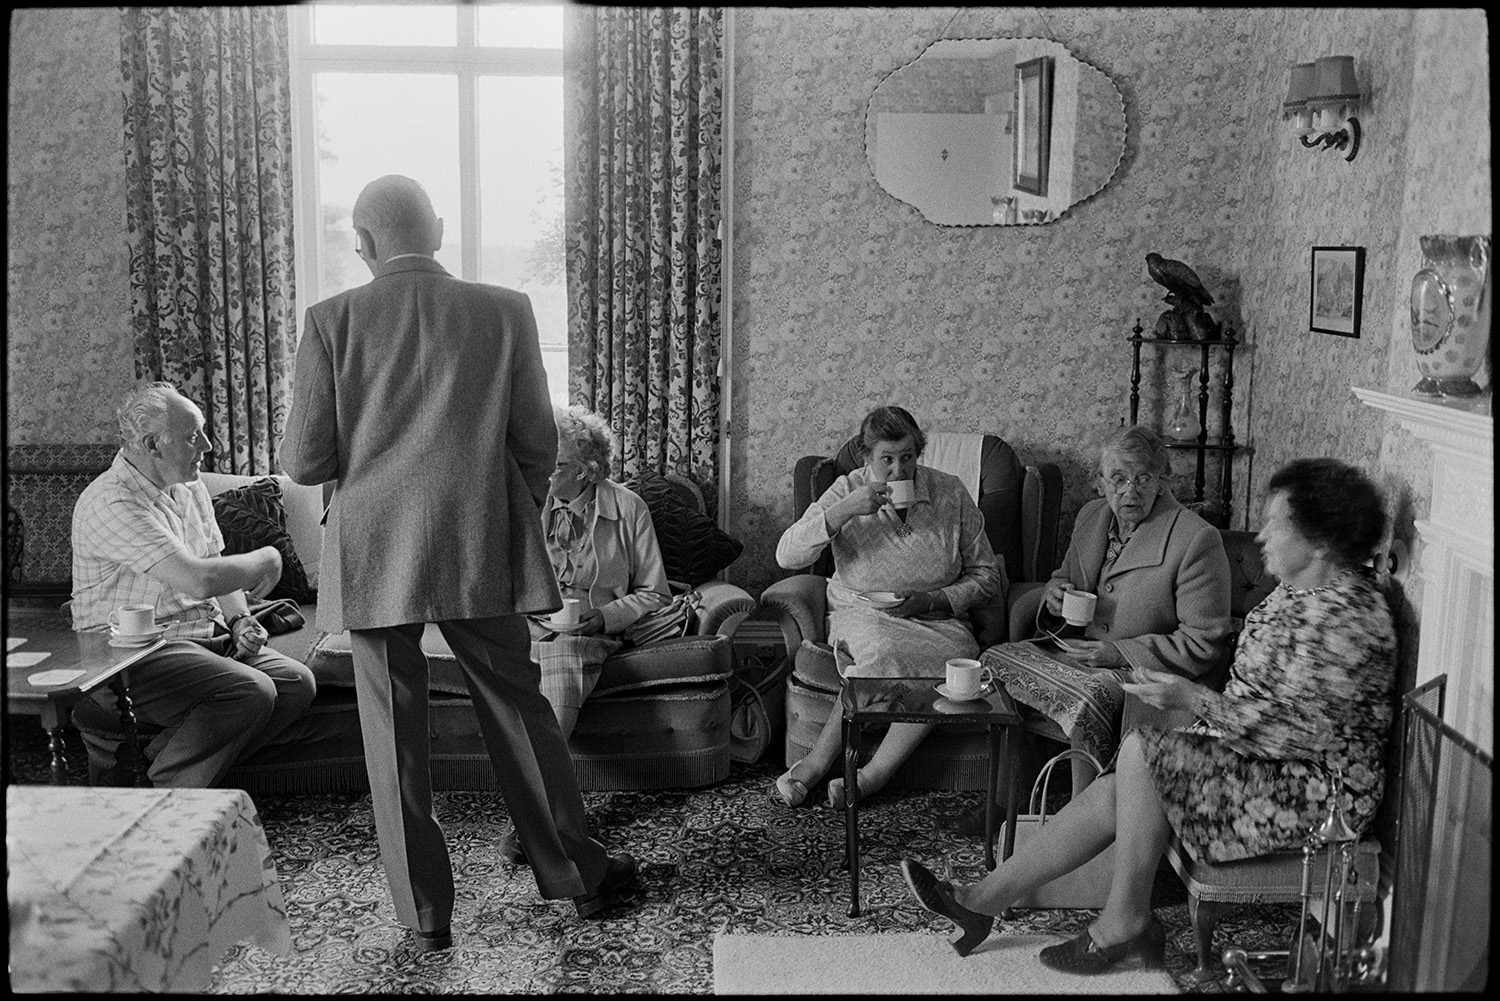 Women, people drinking tea in sitting room at fete.<br />
[Men and women sitting on armchairs and a sofa, drinking tea and chatting at a fete at the Old Rectory, Merton. The walls are covered with patterned wallpaper and a mirror is hung on the wall in the background.]